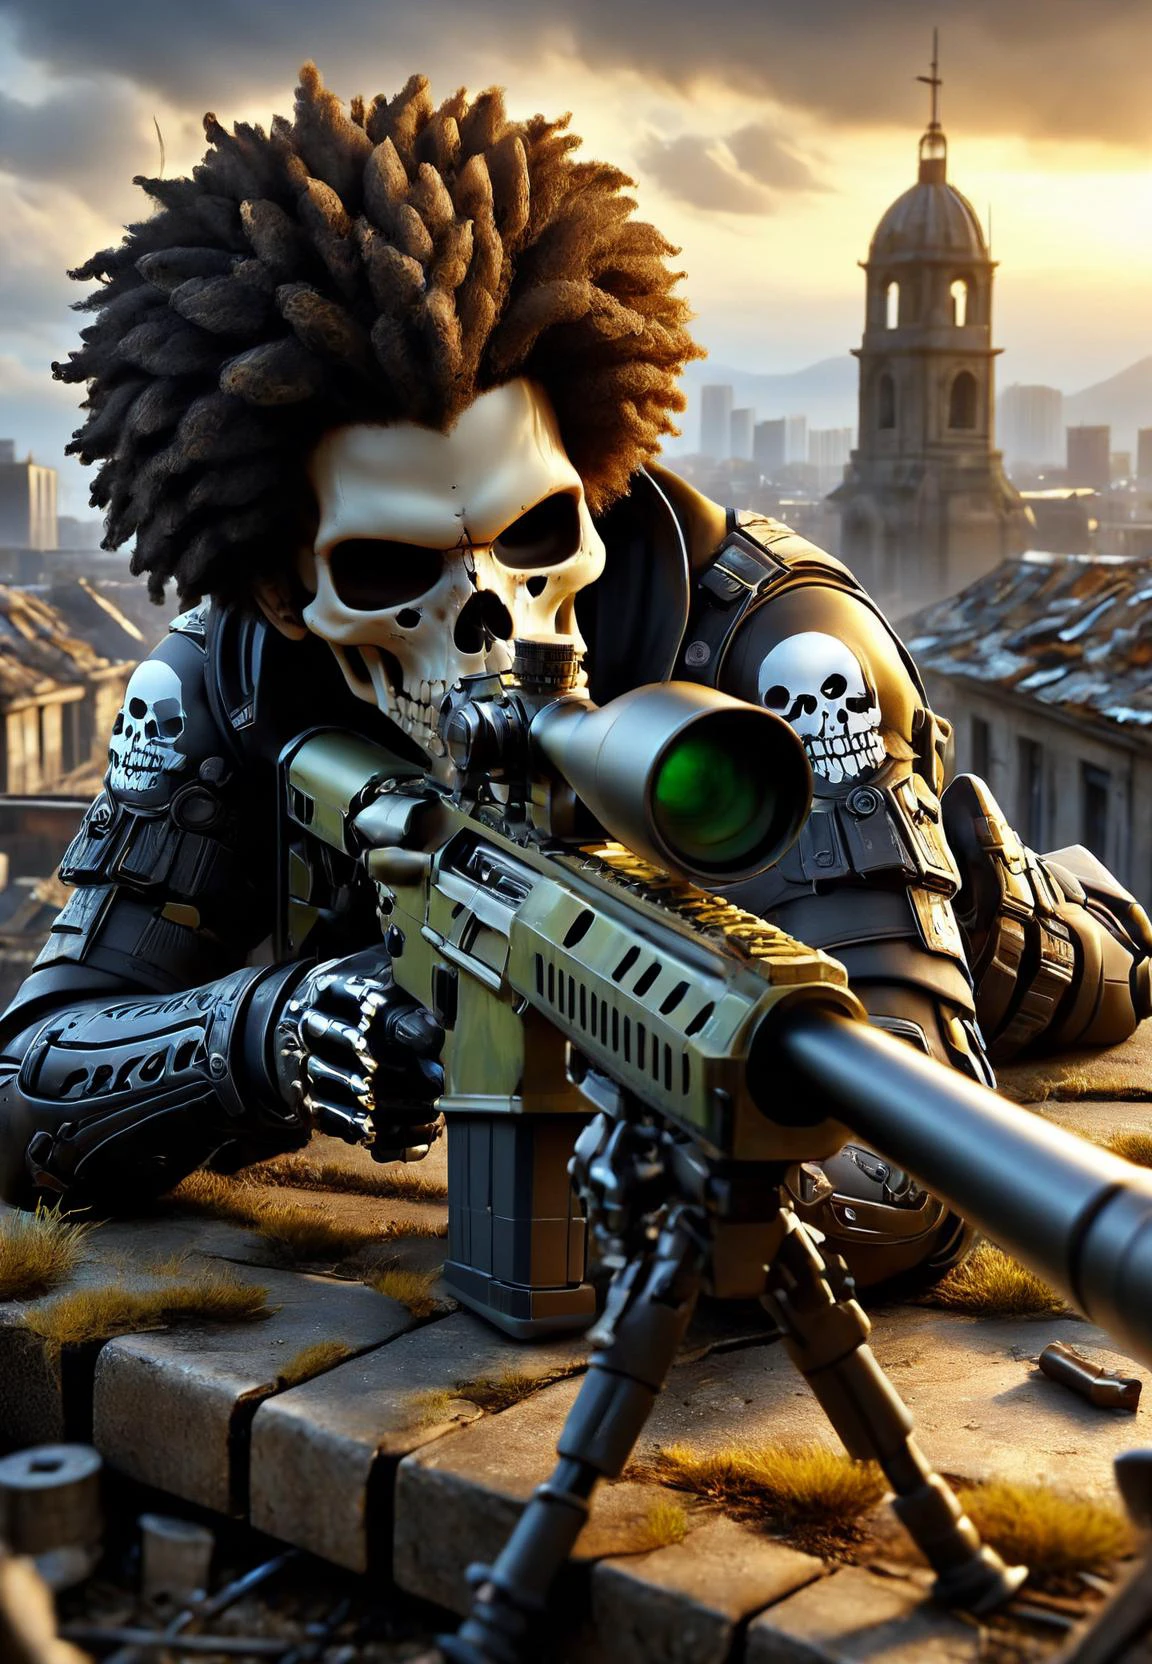 AmAzing quAlity, mAsterpiece, best quAlity, hyper detAiled, ultrA detAiled, 超高清, 景深, detAil eyes, from Above, 天际线,
A (颅骨:1.4) with Afro hAir lAying on the roof, cAmouflAge suit, Aiming At the cAmerA, Action shot, 反射光, 古老建筑, AbAndoned city, wAr,
狙击枪, cArtridge cAse,
